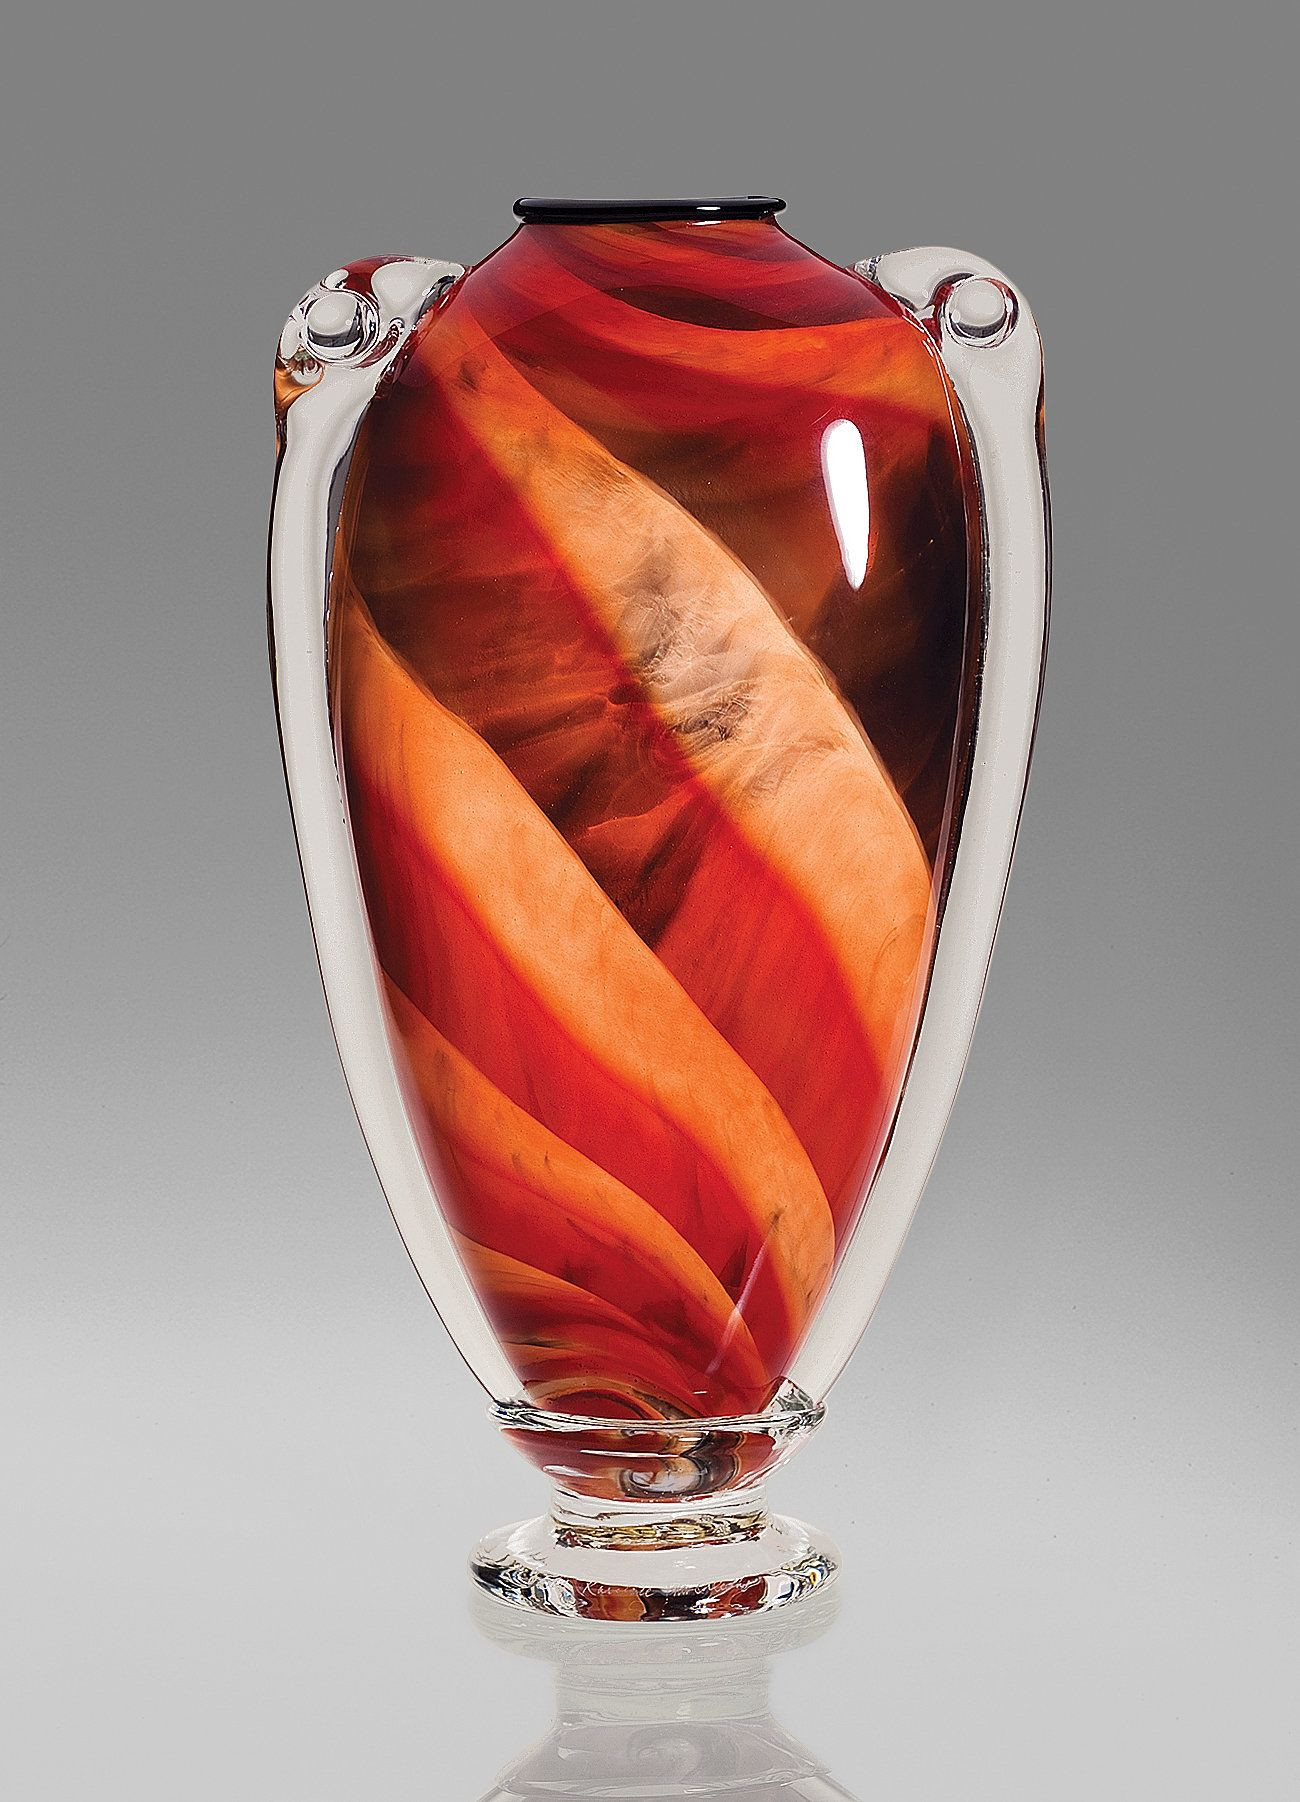 18 Unique Red Blown Glass Vase 2024 free download red blown glass vase of red shoulder vase by mark rosenbaum art glass vase pinterest with regard to red shoulder vase by mark rosenbaum art glass vase pinterest glass glass art and art art